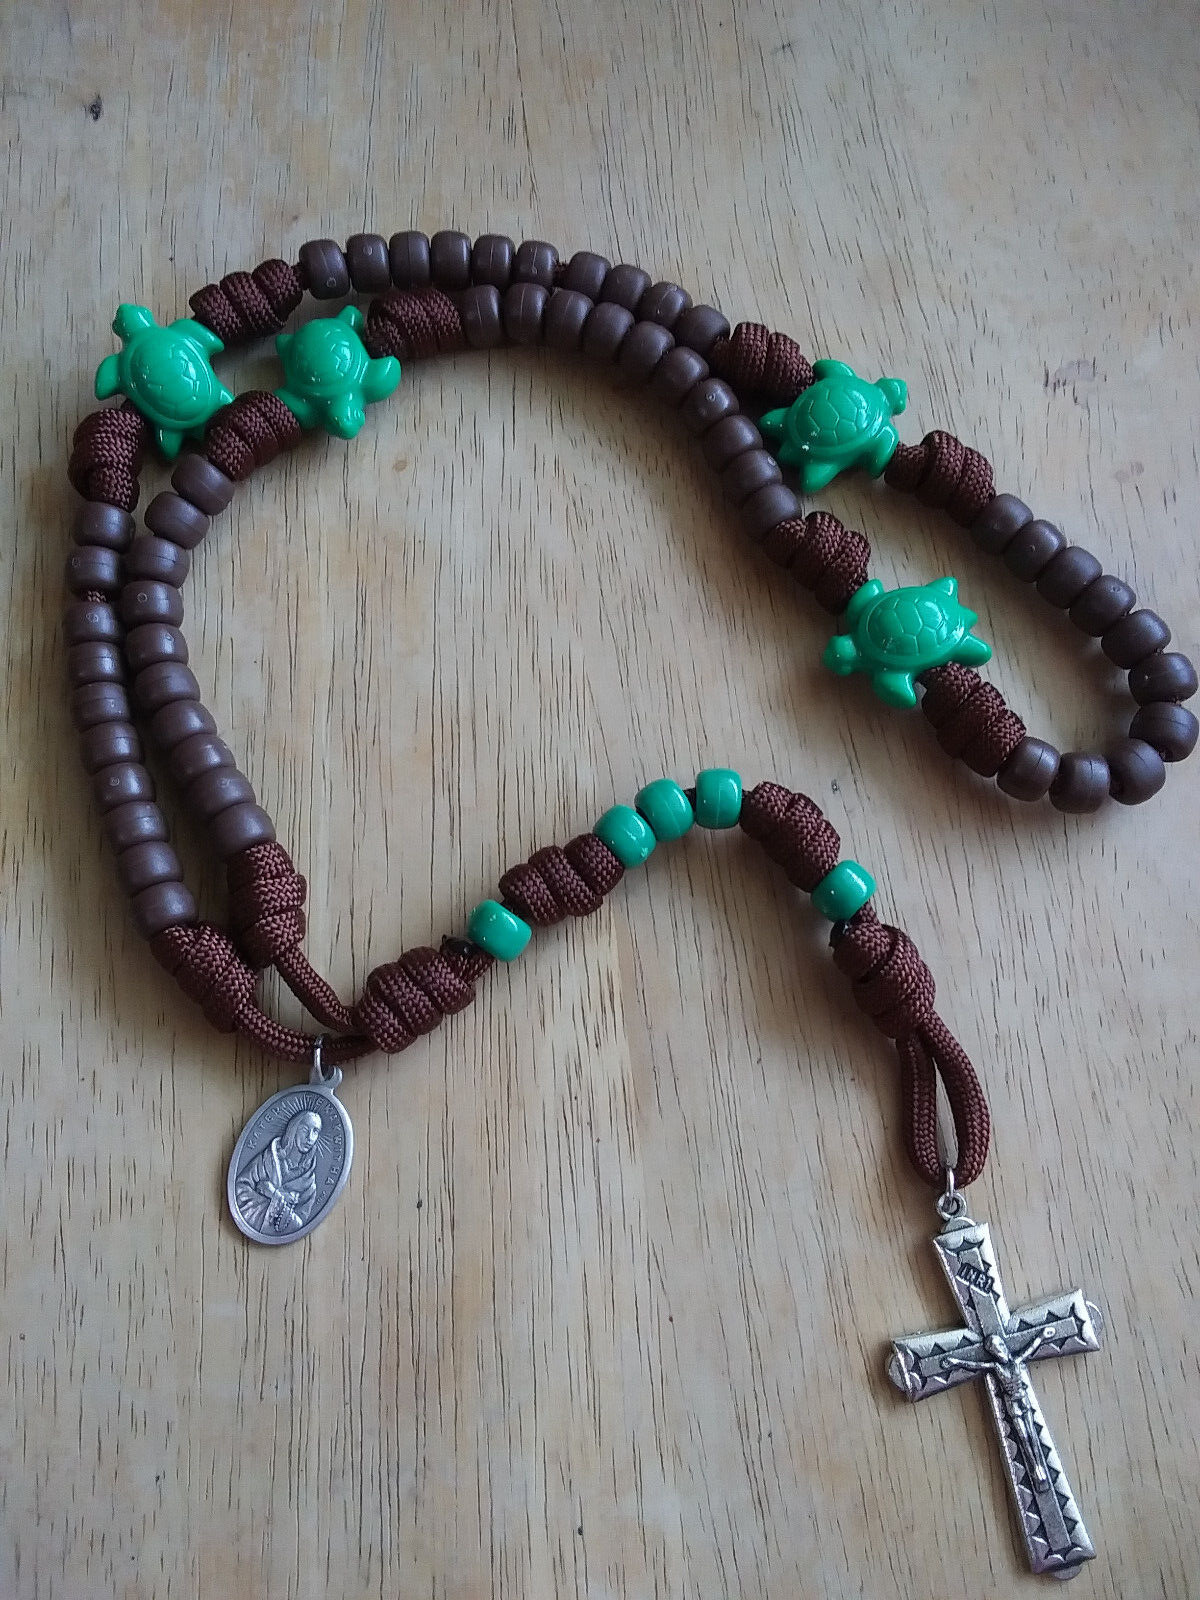 St Kateri Tekakwitha Turtle Paracord Rosary Beads Brown Green Silver Medal Card